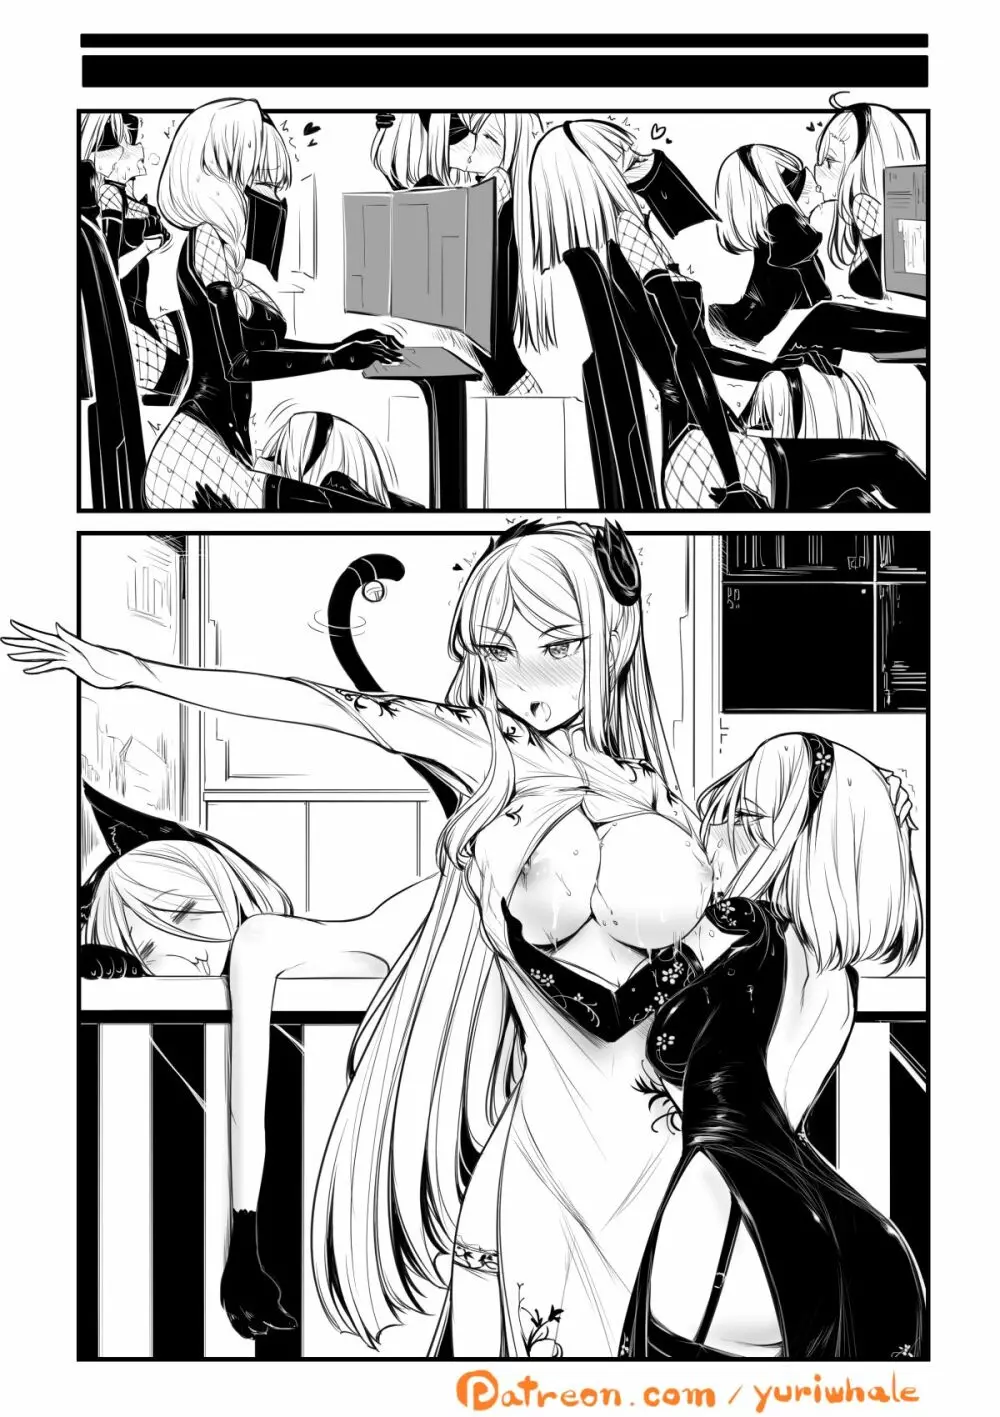 Nier : Automata Domina Commander X 2B X 6O 10 Pages Done Page.11